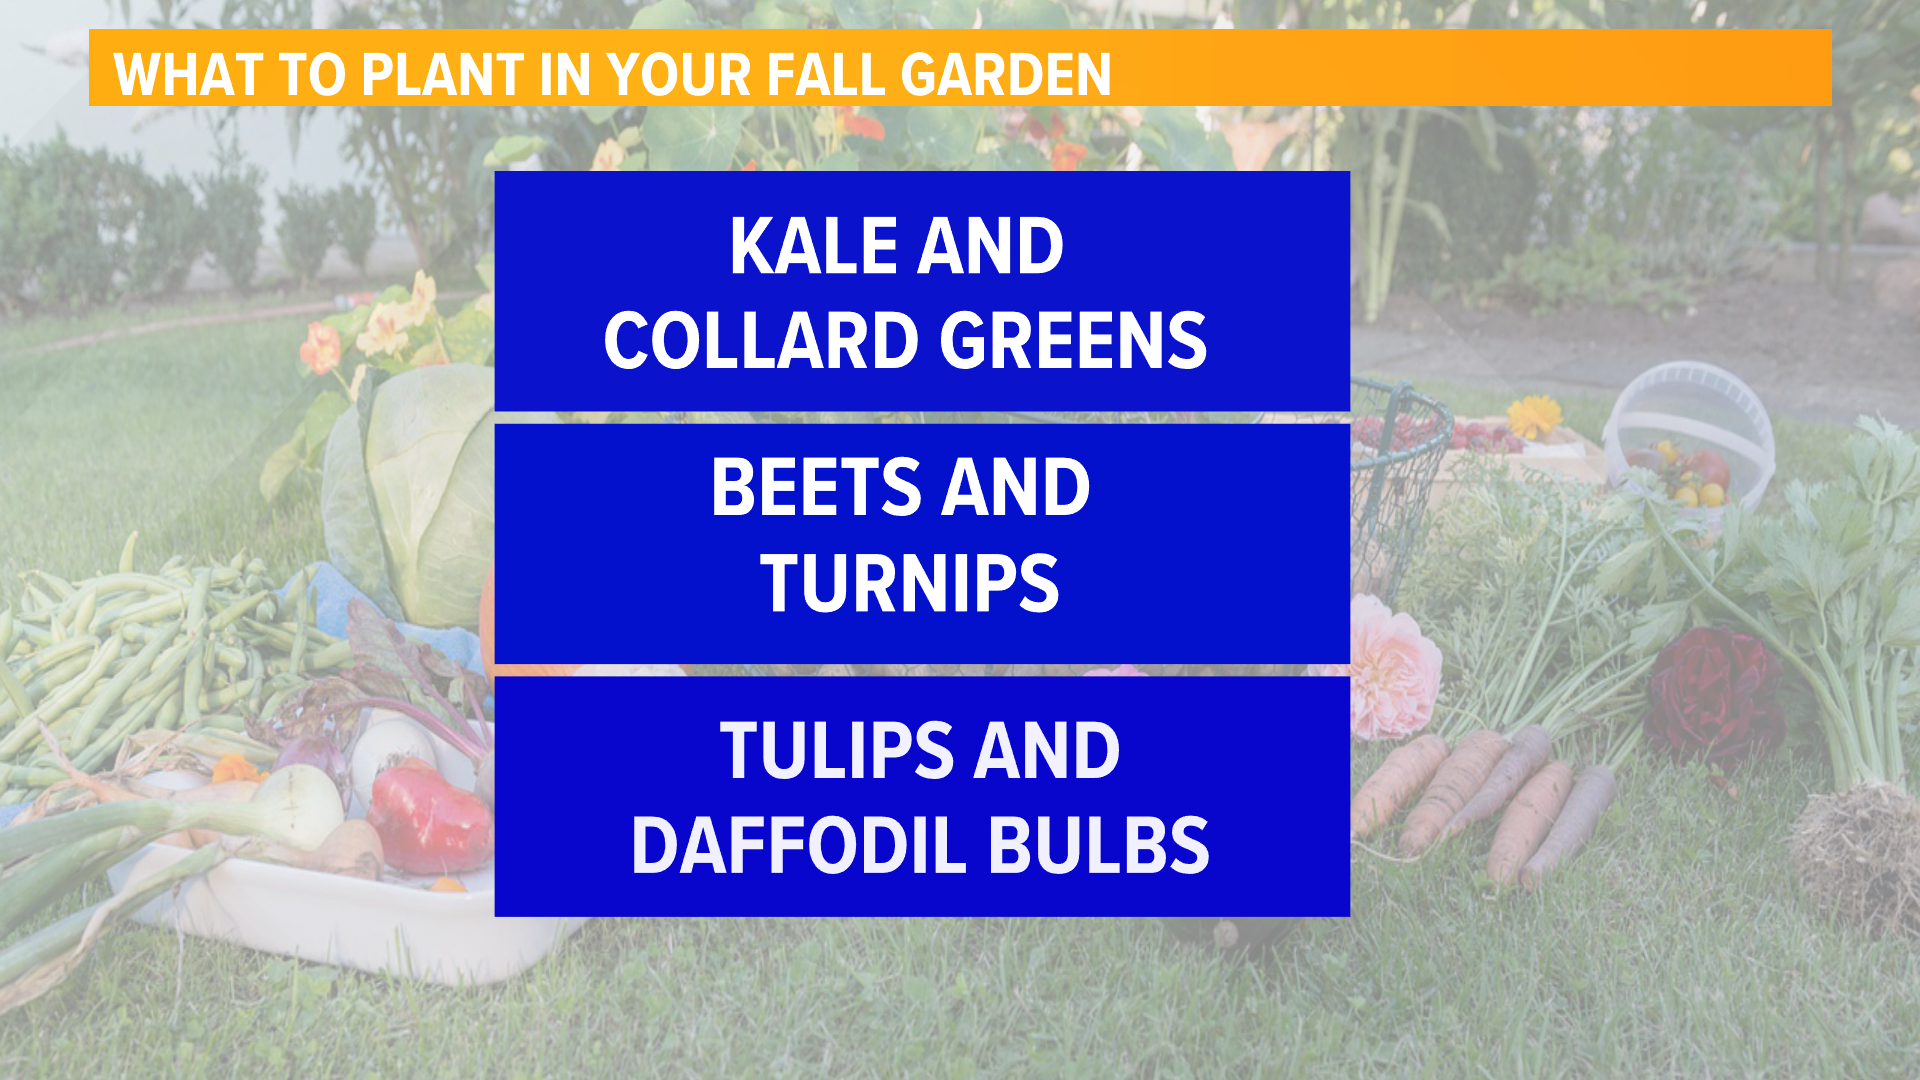 Fall is less than a month away, and the change in seasons brings the need for some new plants.